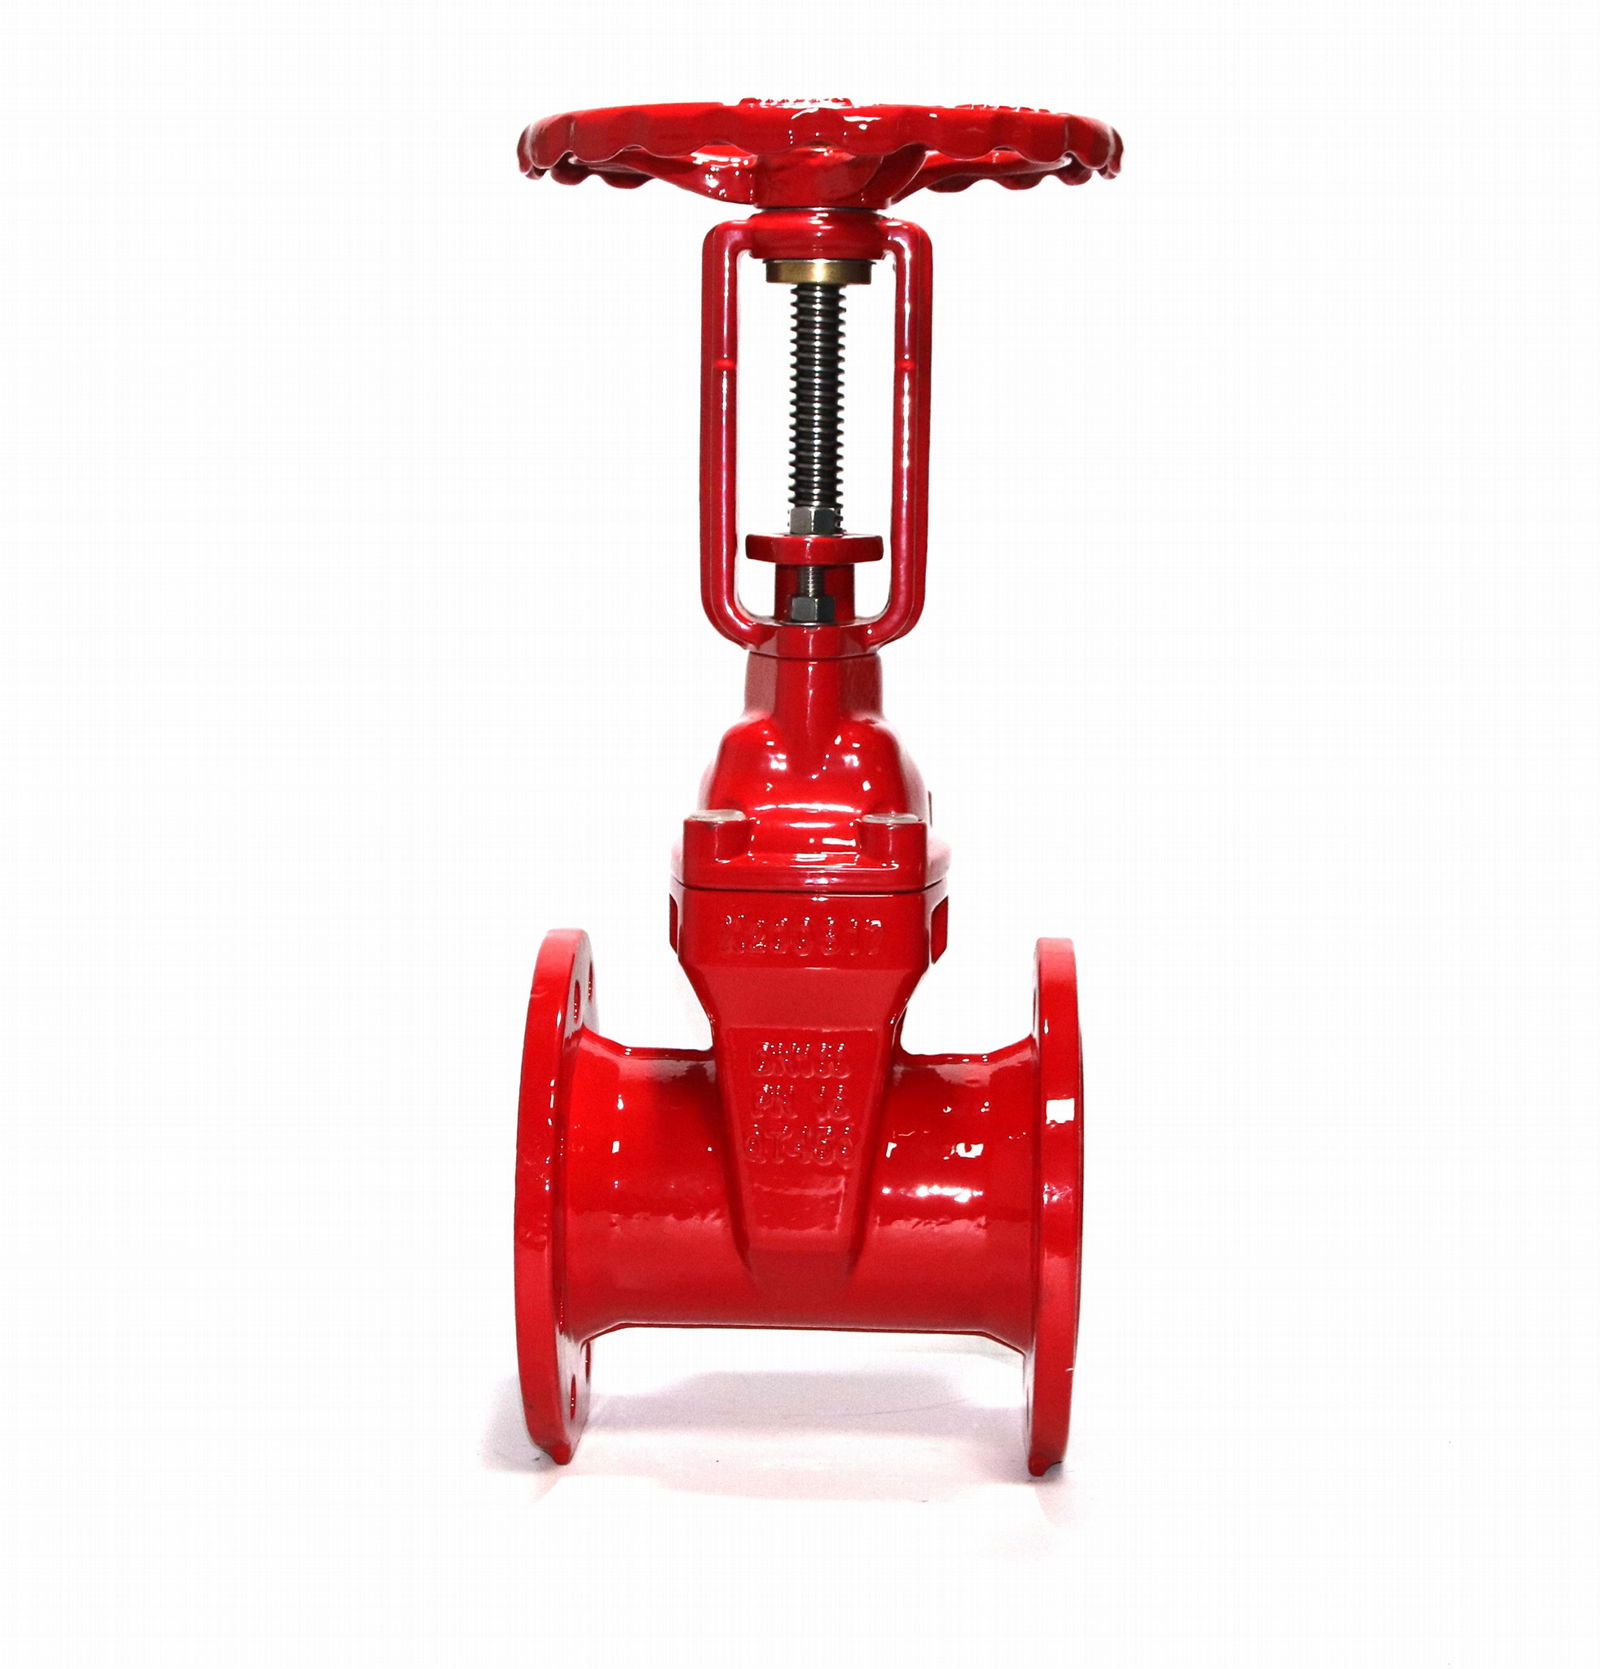 Outside Screw & York, Resilient Seated Gate Valve